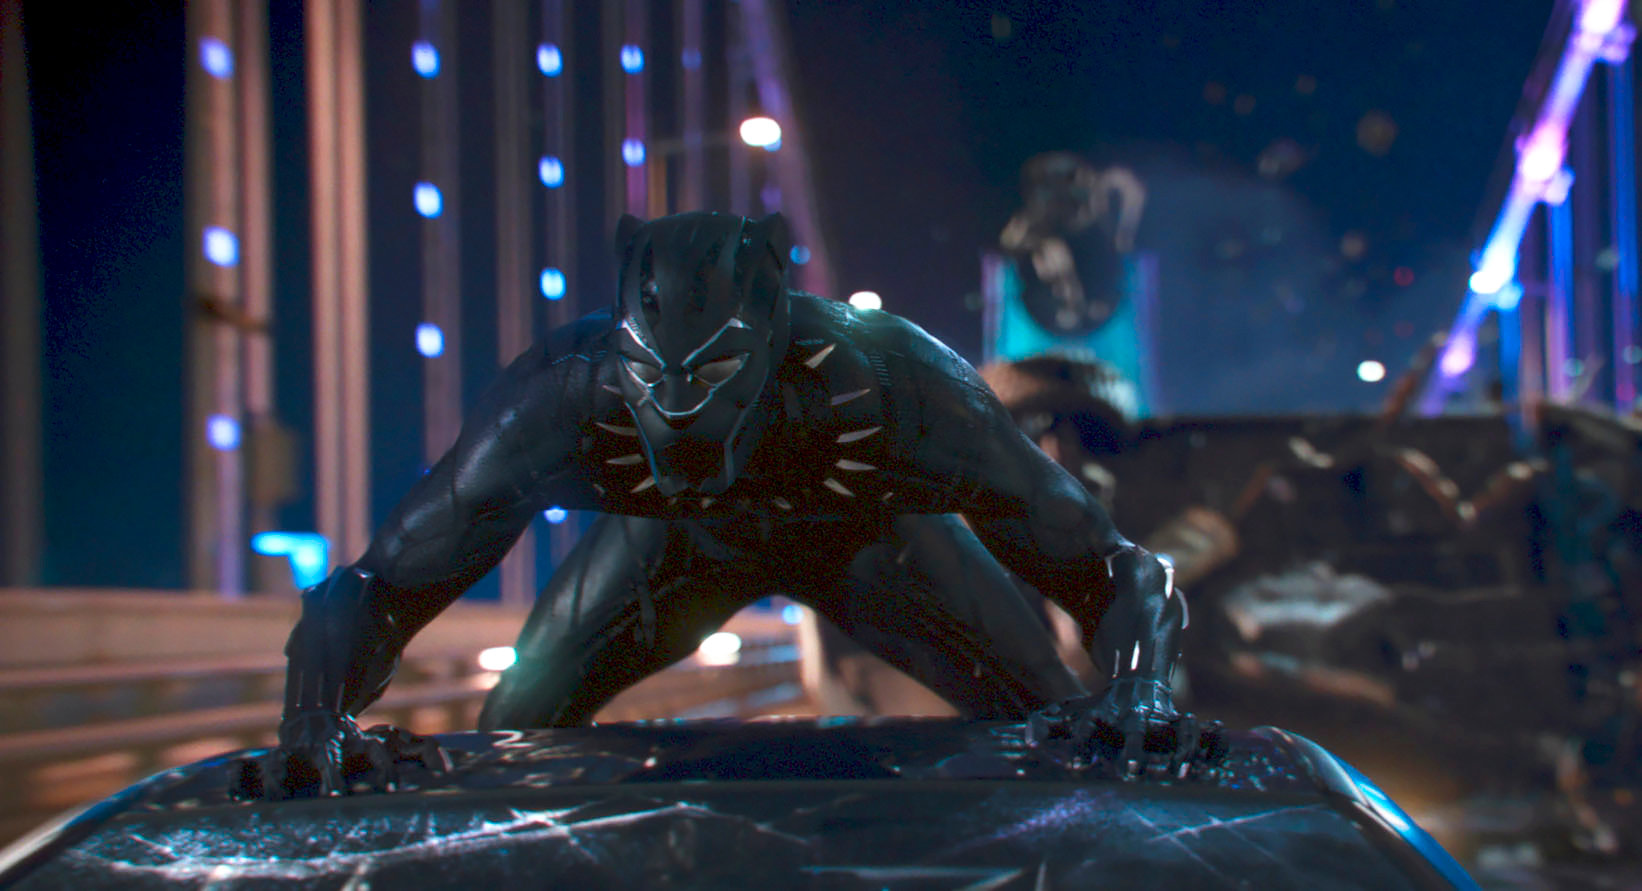 Marvel Studios ‘Black Panther’ Coming to Disney+ in March 2020